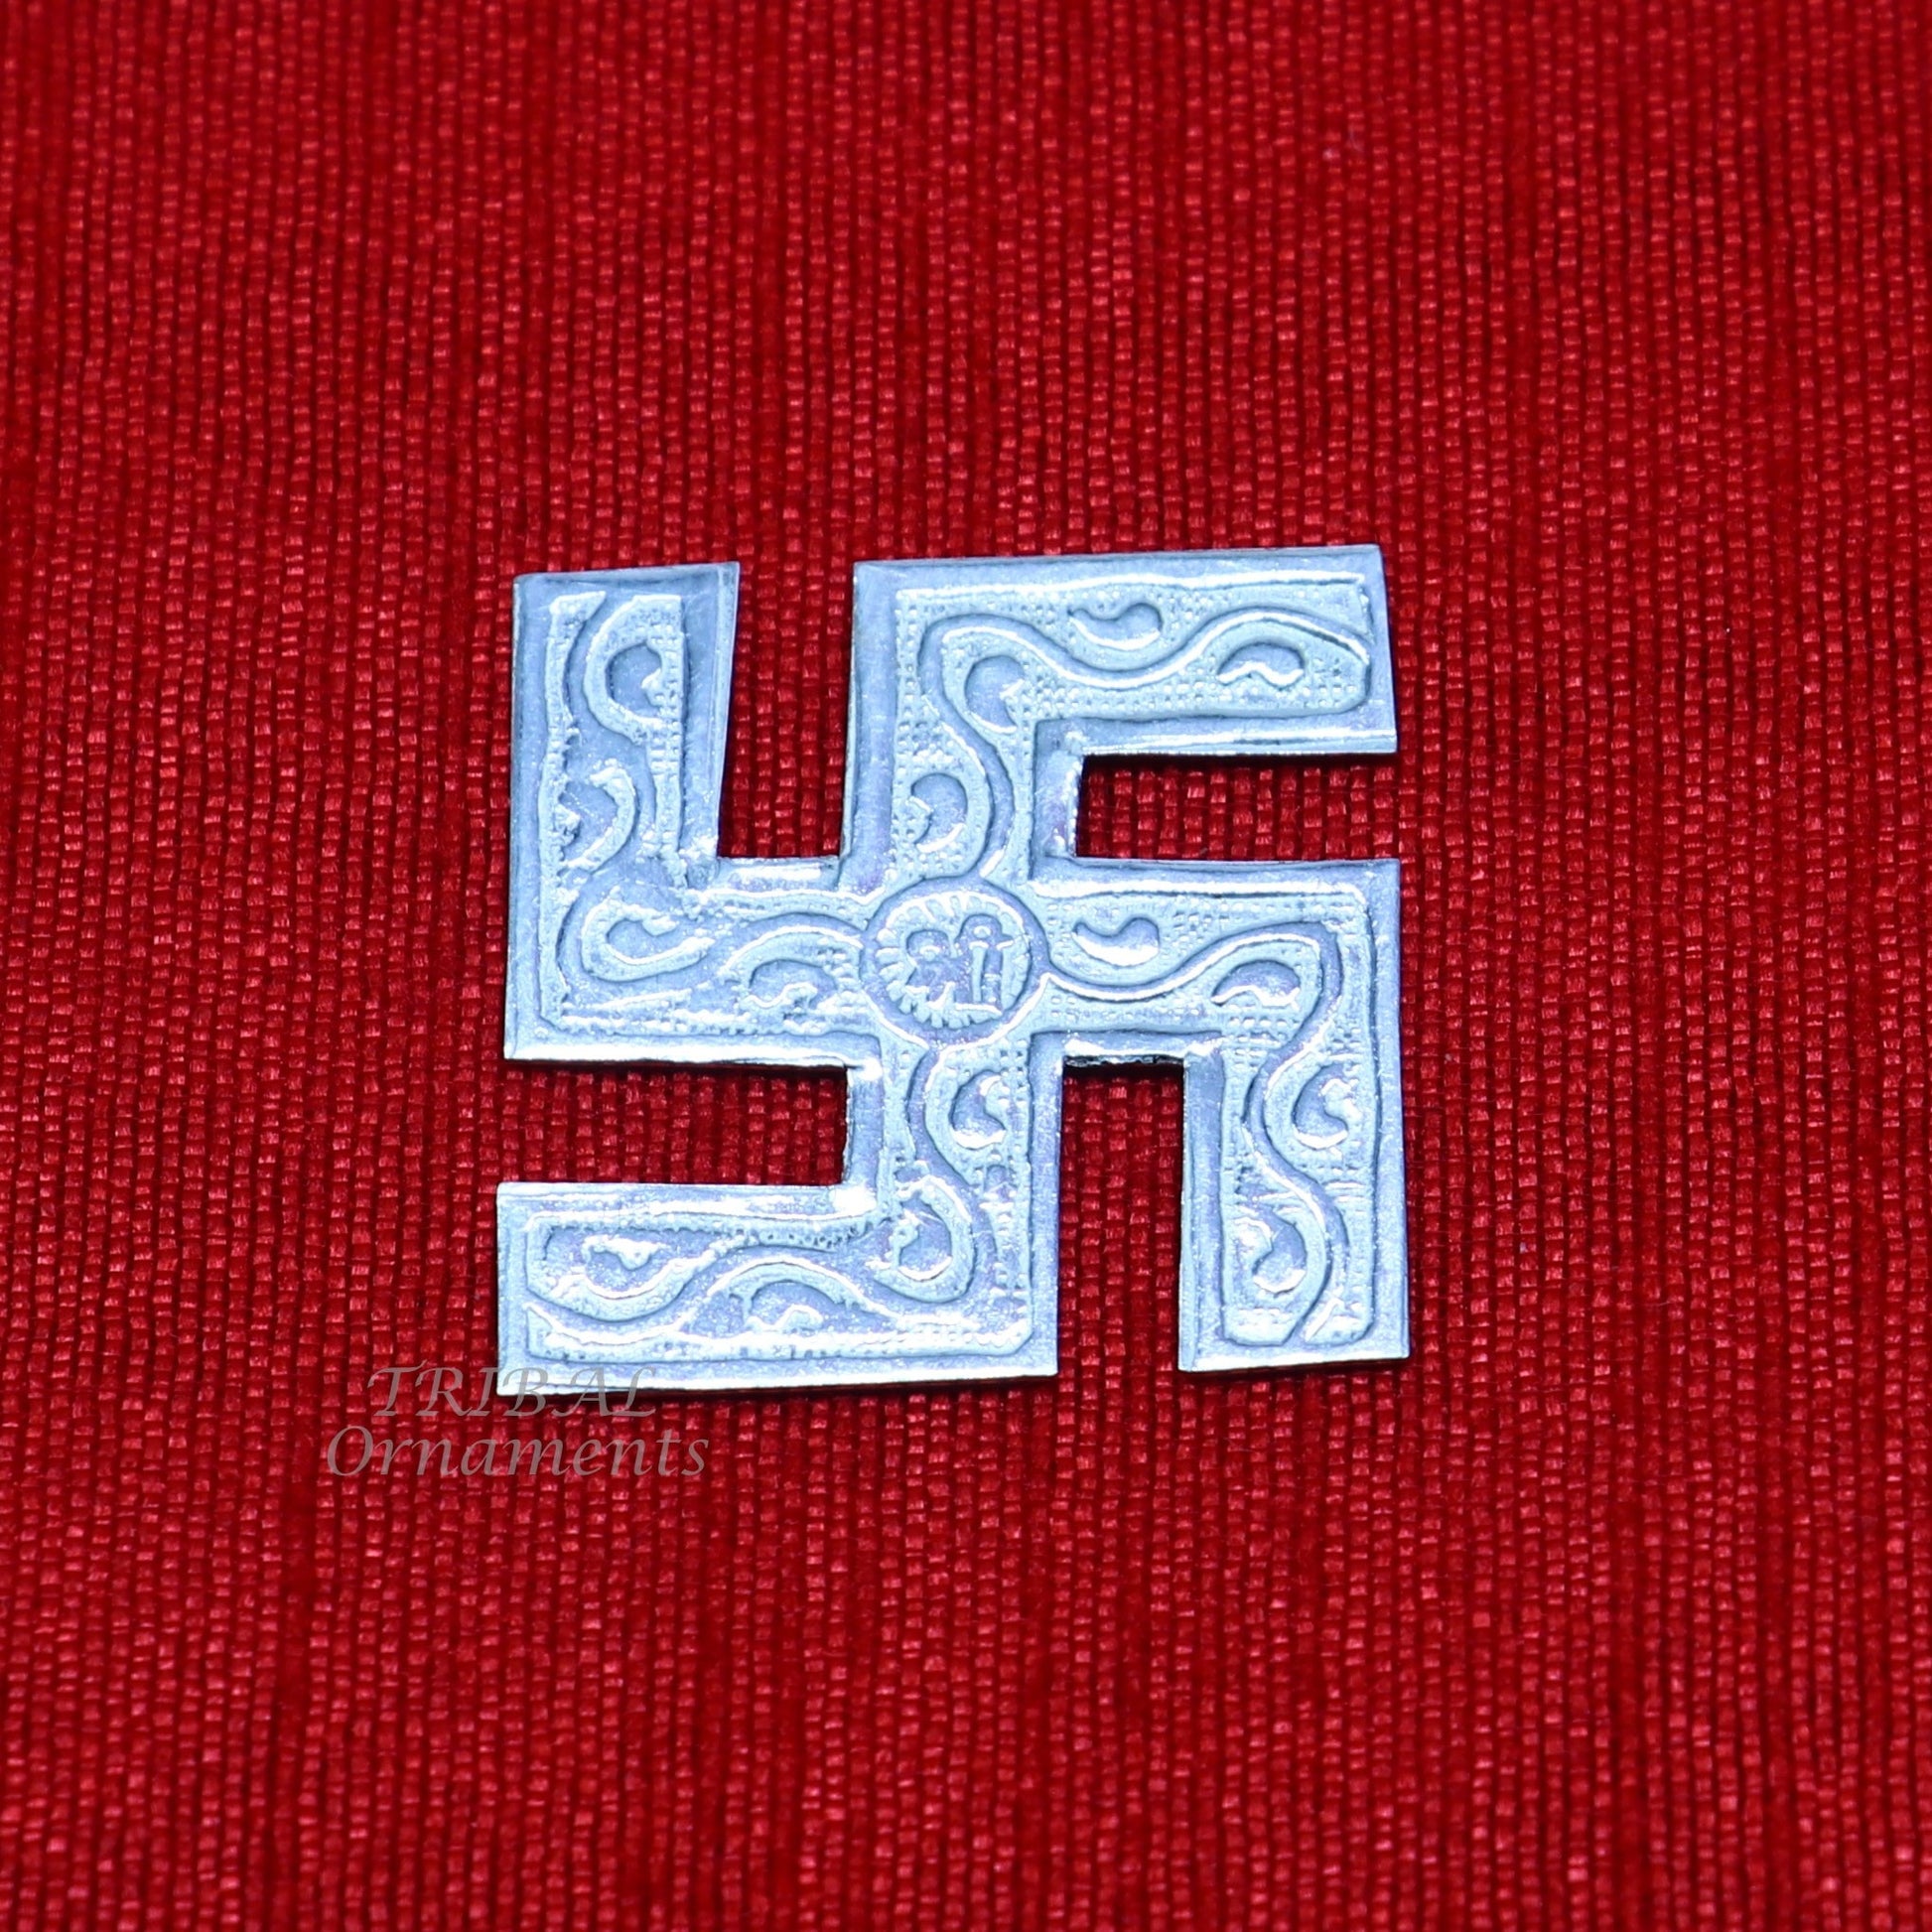 1" inches 925 sterling silver handmade swastika amazing divine holy swastik for your home and temple su894 - TRIBAL ORNAMENTS